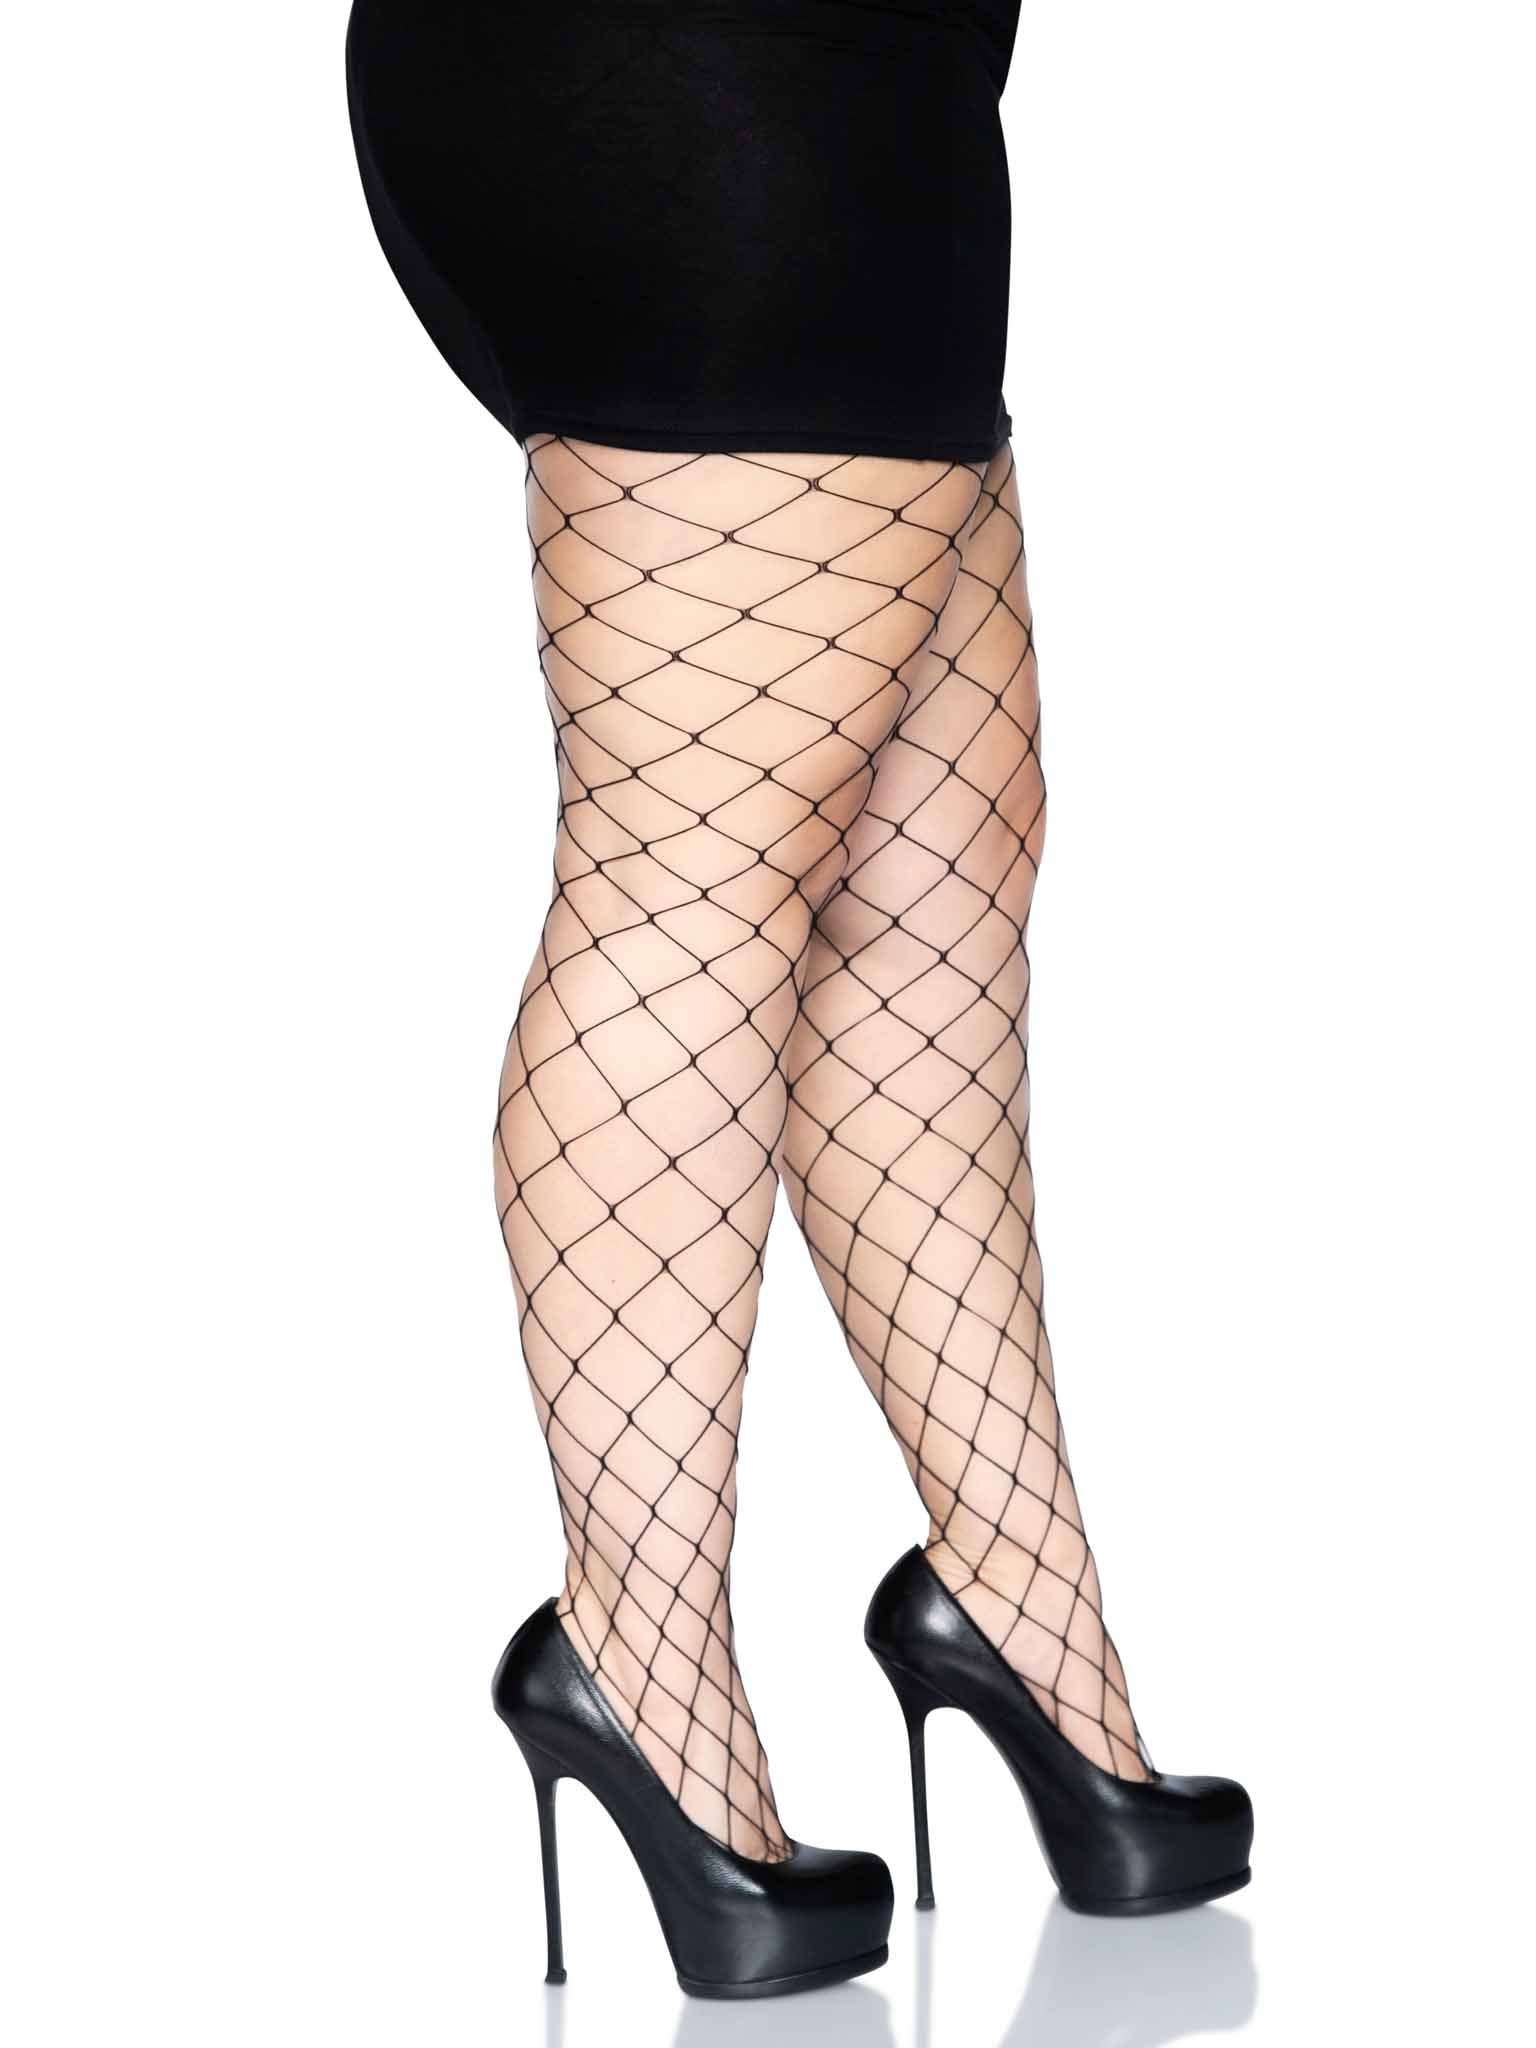  Leg Avenue Women's Fishnet Footless Tights, Black Fence Net,  One Size: Lingerie Sets: Clothing, Shoes & Jewelry